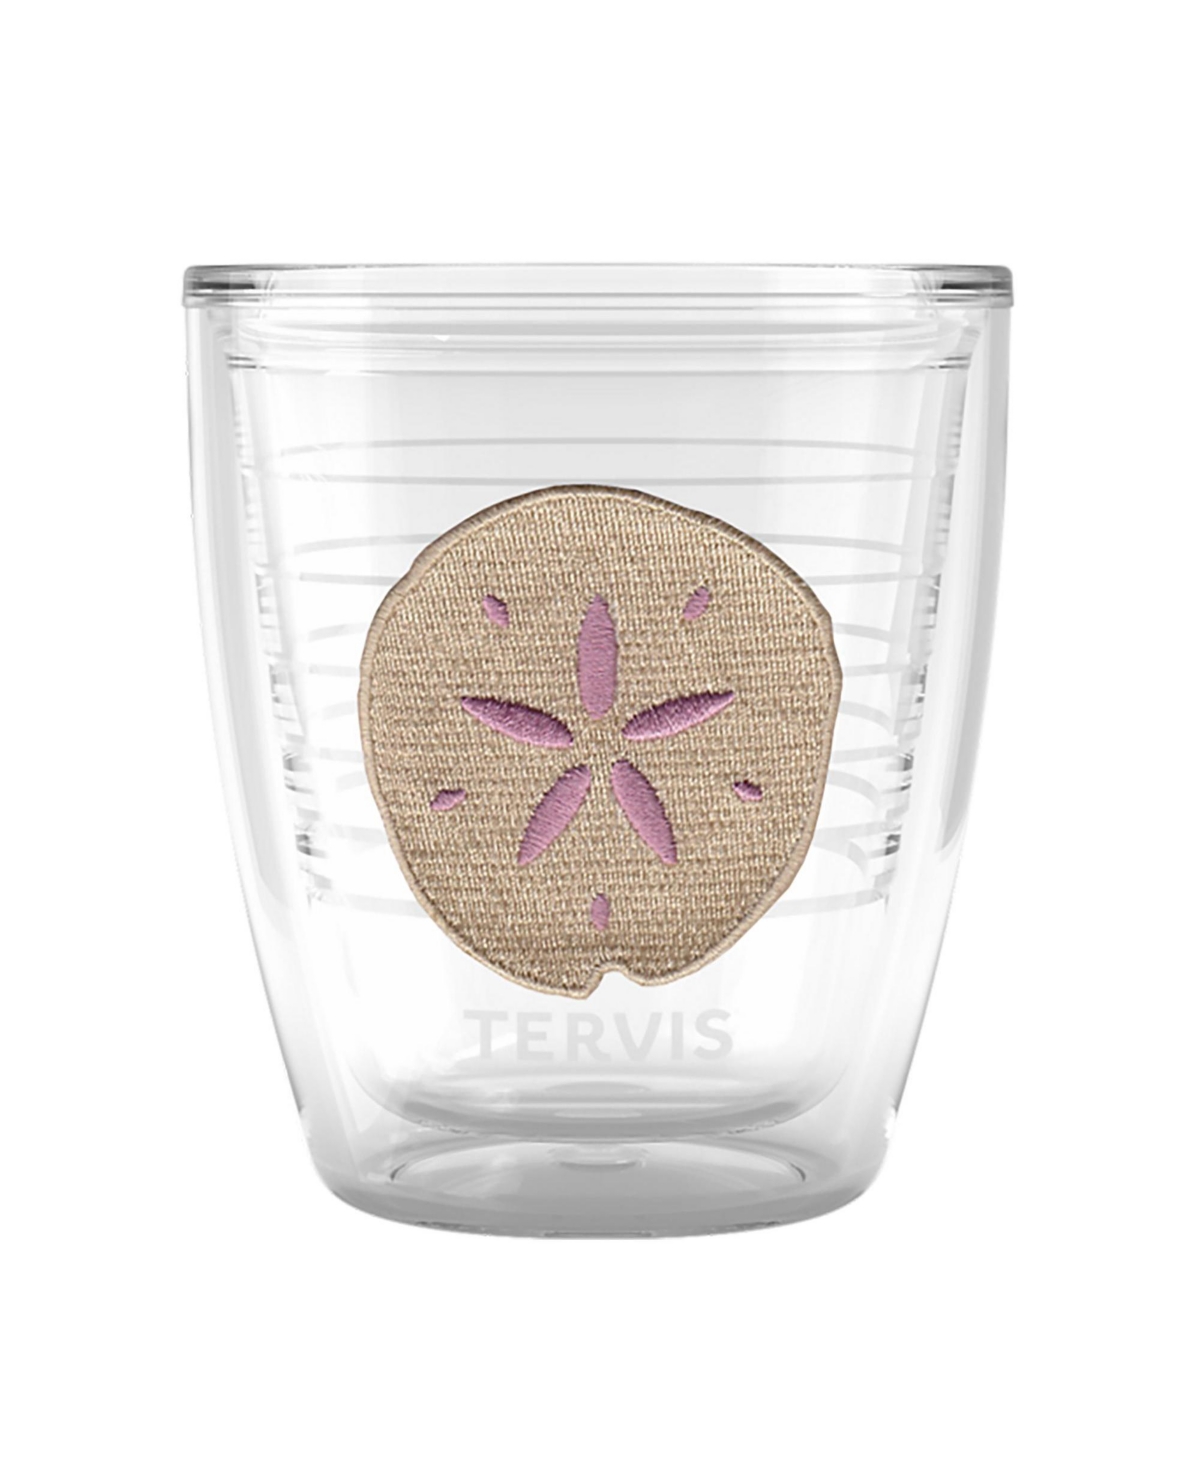 Tervis Tumbler Tervis Beachcomber Collection Sand Dollar Made In Usa Double Walled Insulated Tumbler Travel Cup Kee In Open Miscellaneous